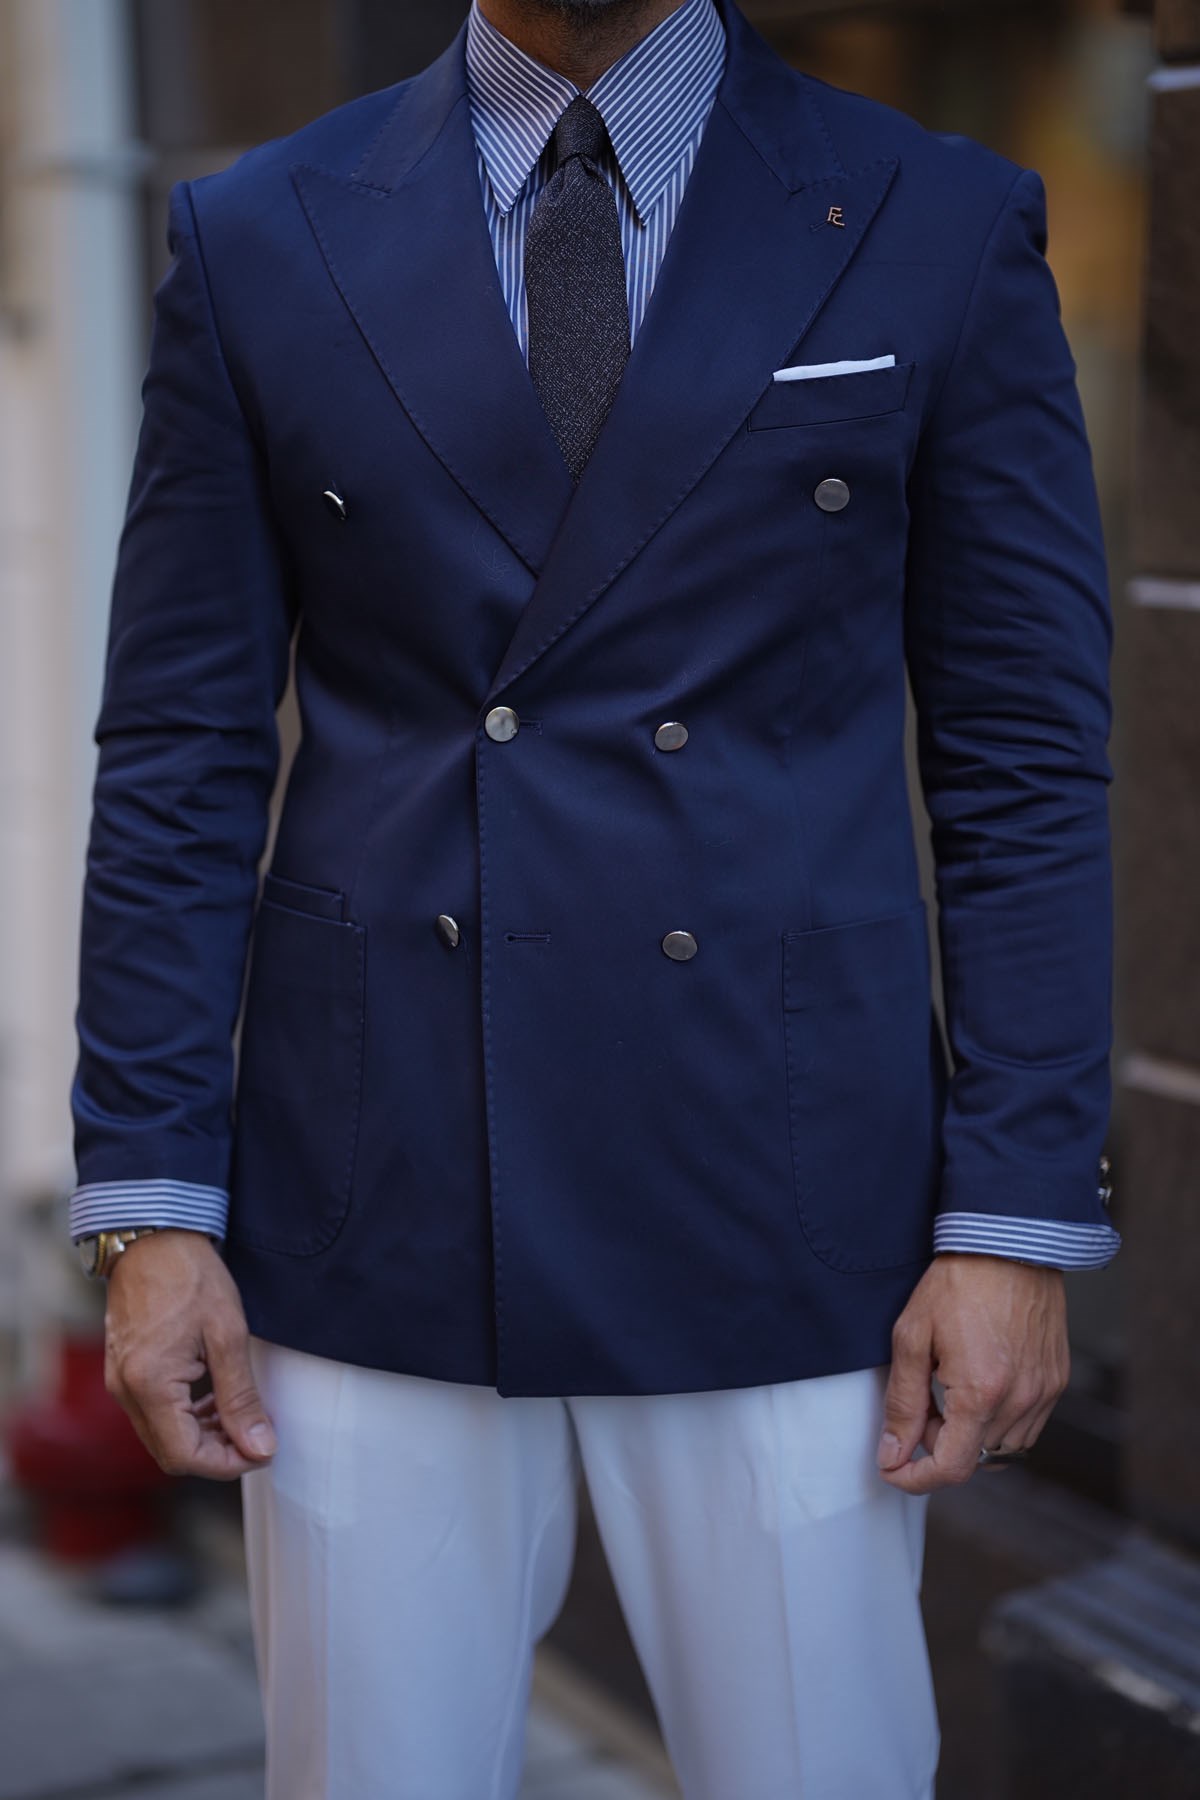 NAVY BLUE DOUBLE BREASTED SINGLE JACKET - SLIM FIT